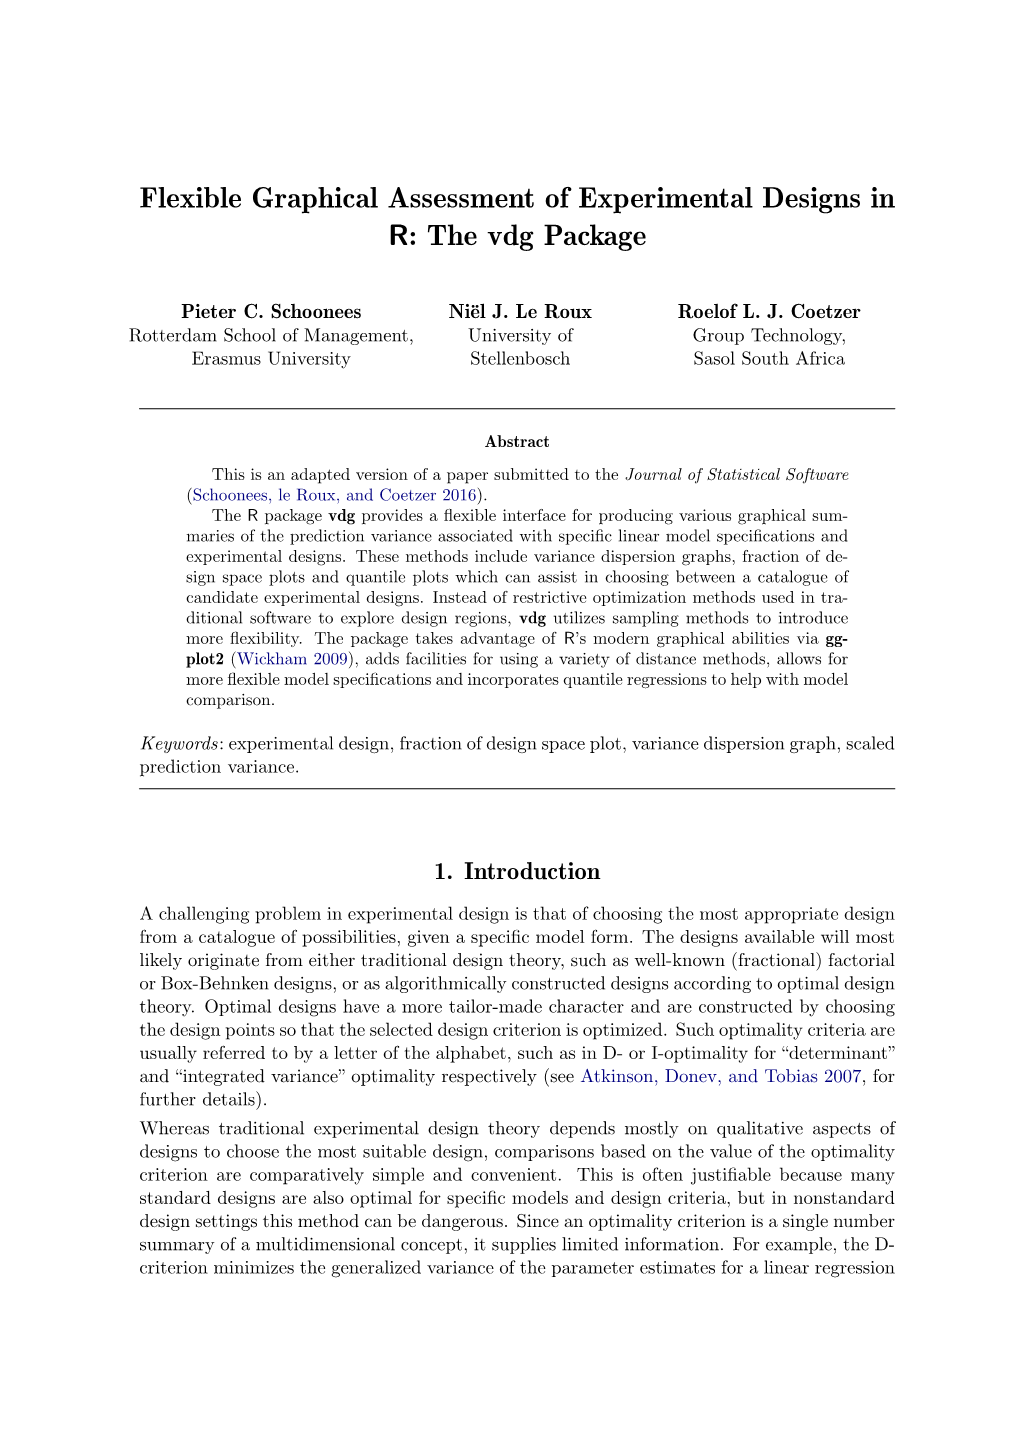 Flexible Graphical Assessment of Experimental Designs in R: the Vdg Package